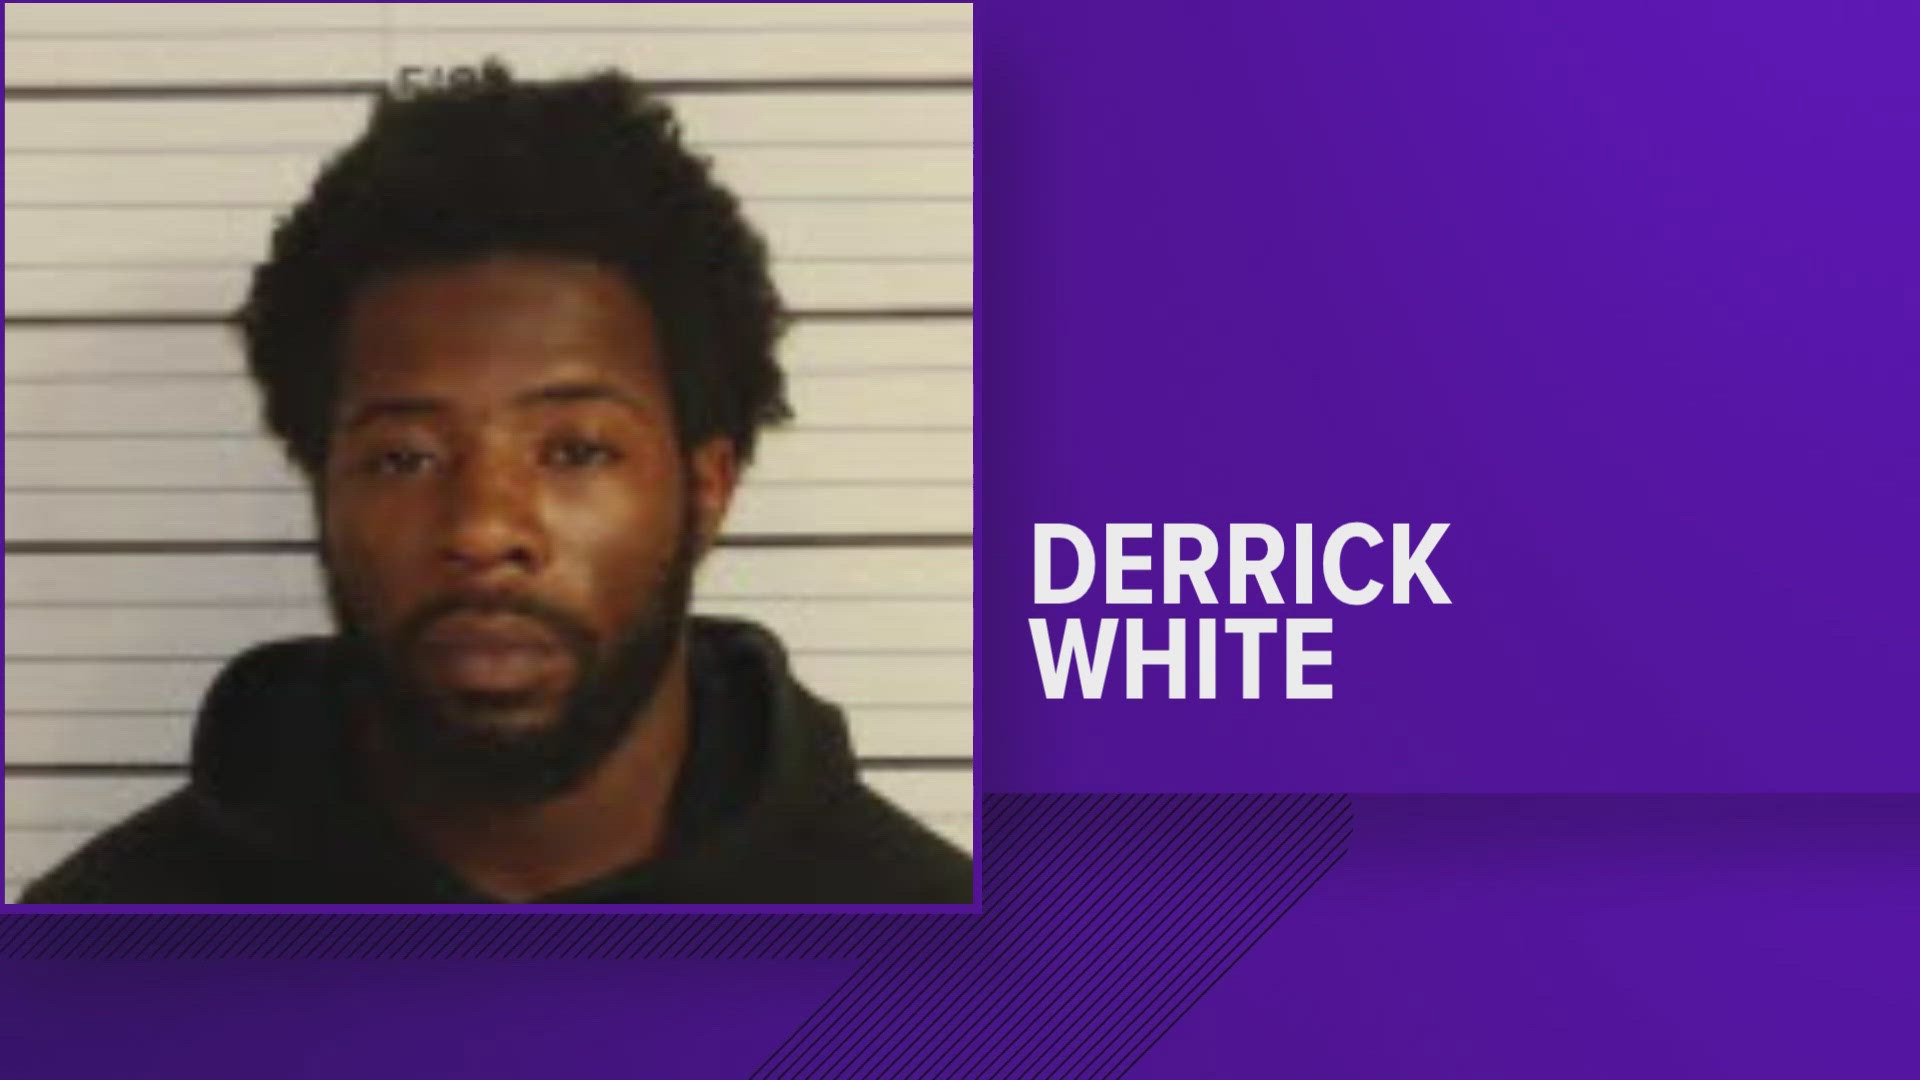 Memphis Police said a man who made threats over social media, referencing Ezekial Kelly, was investigated and then arrested for charges relating to domestic violence